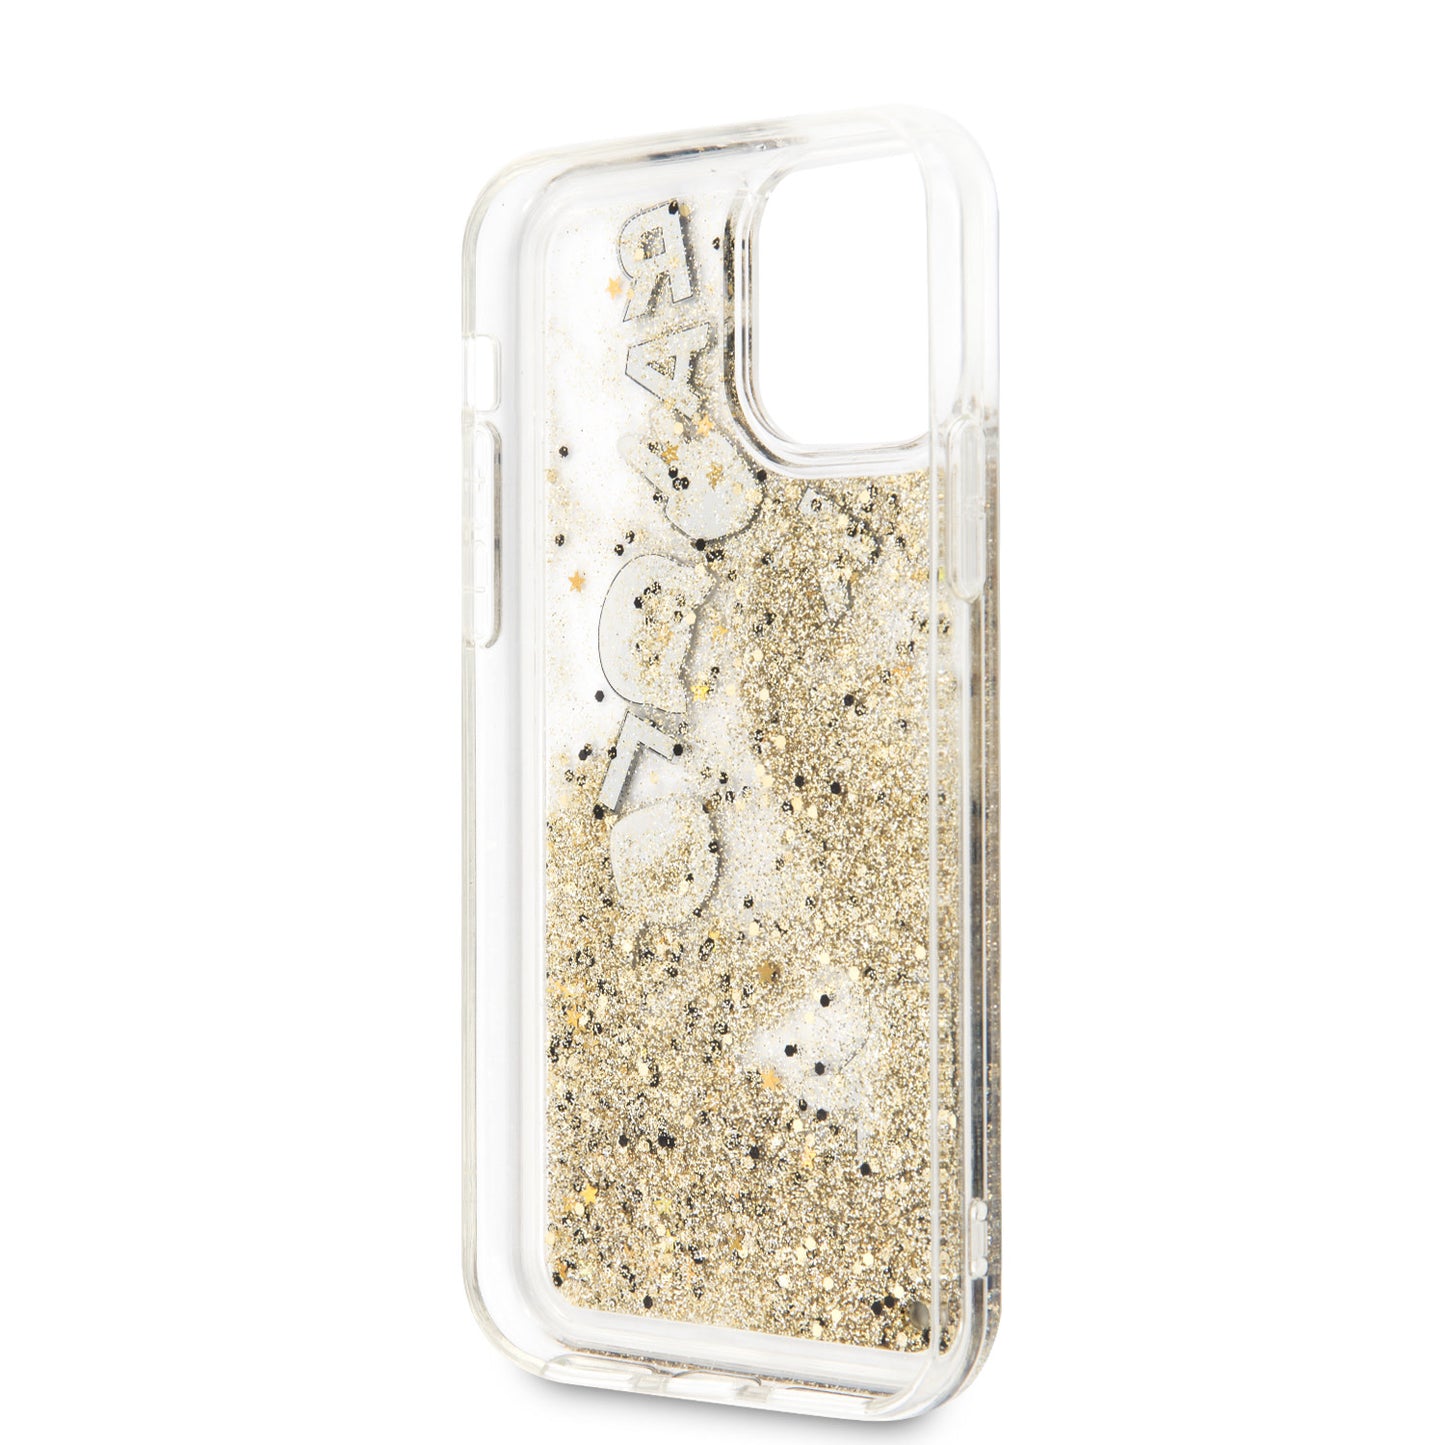 Karl Lagerfeld iPhone 11 PRO Backcover - Glitter - Floating charms - Transparant/Goud